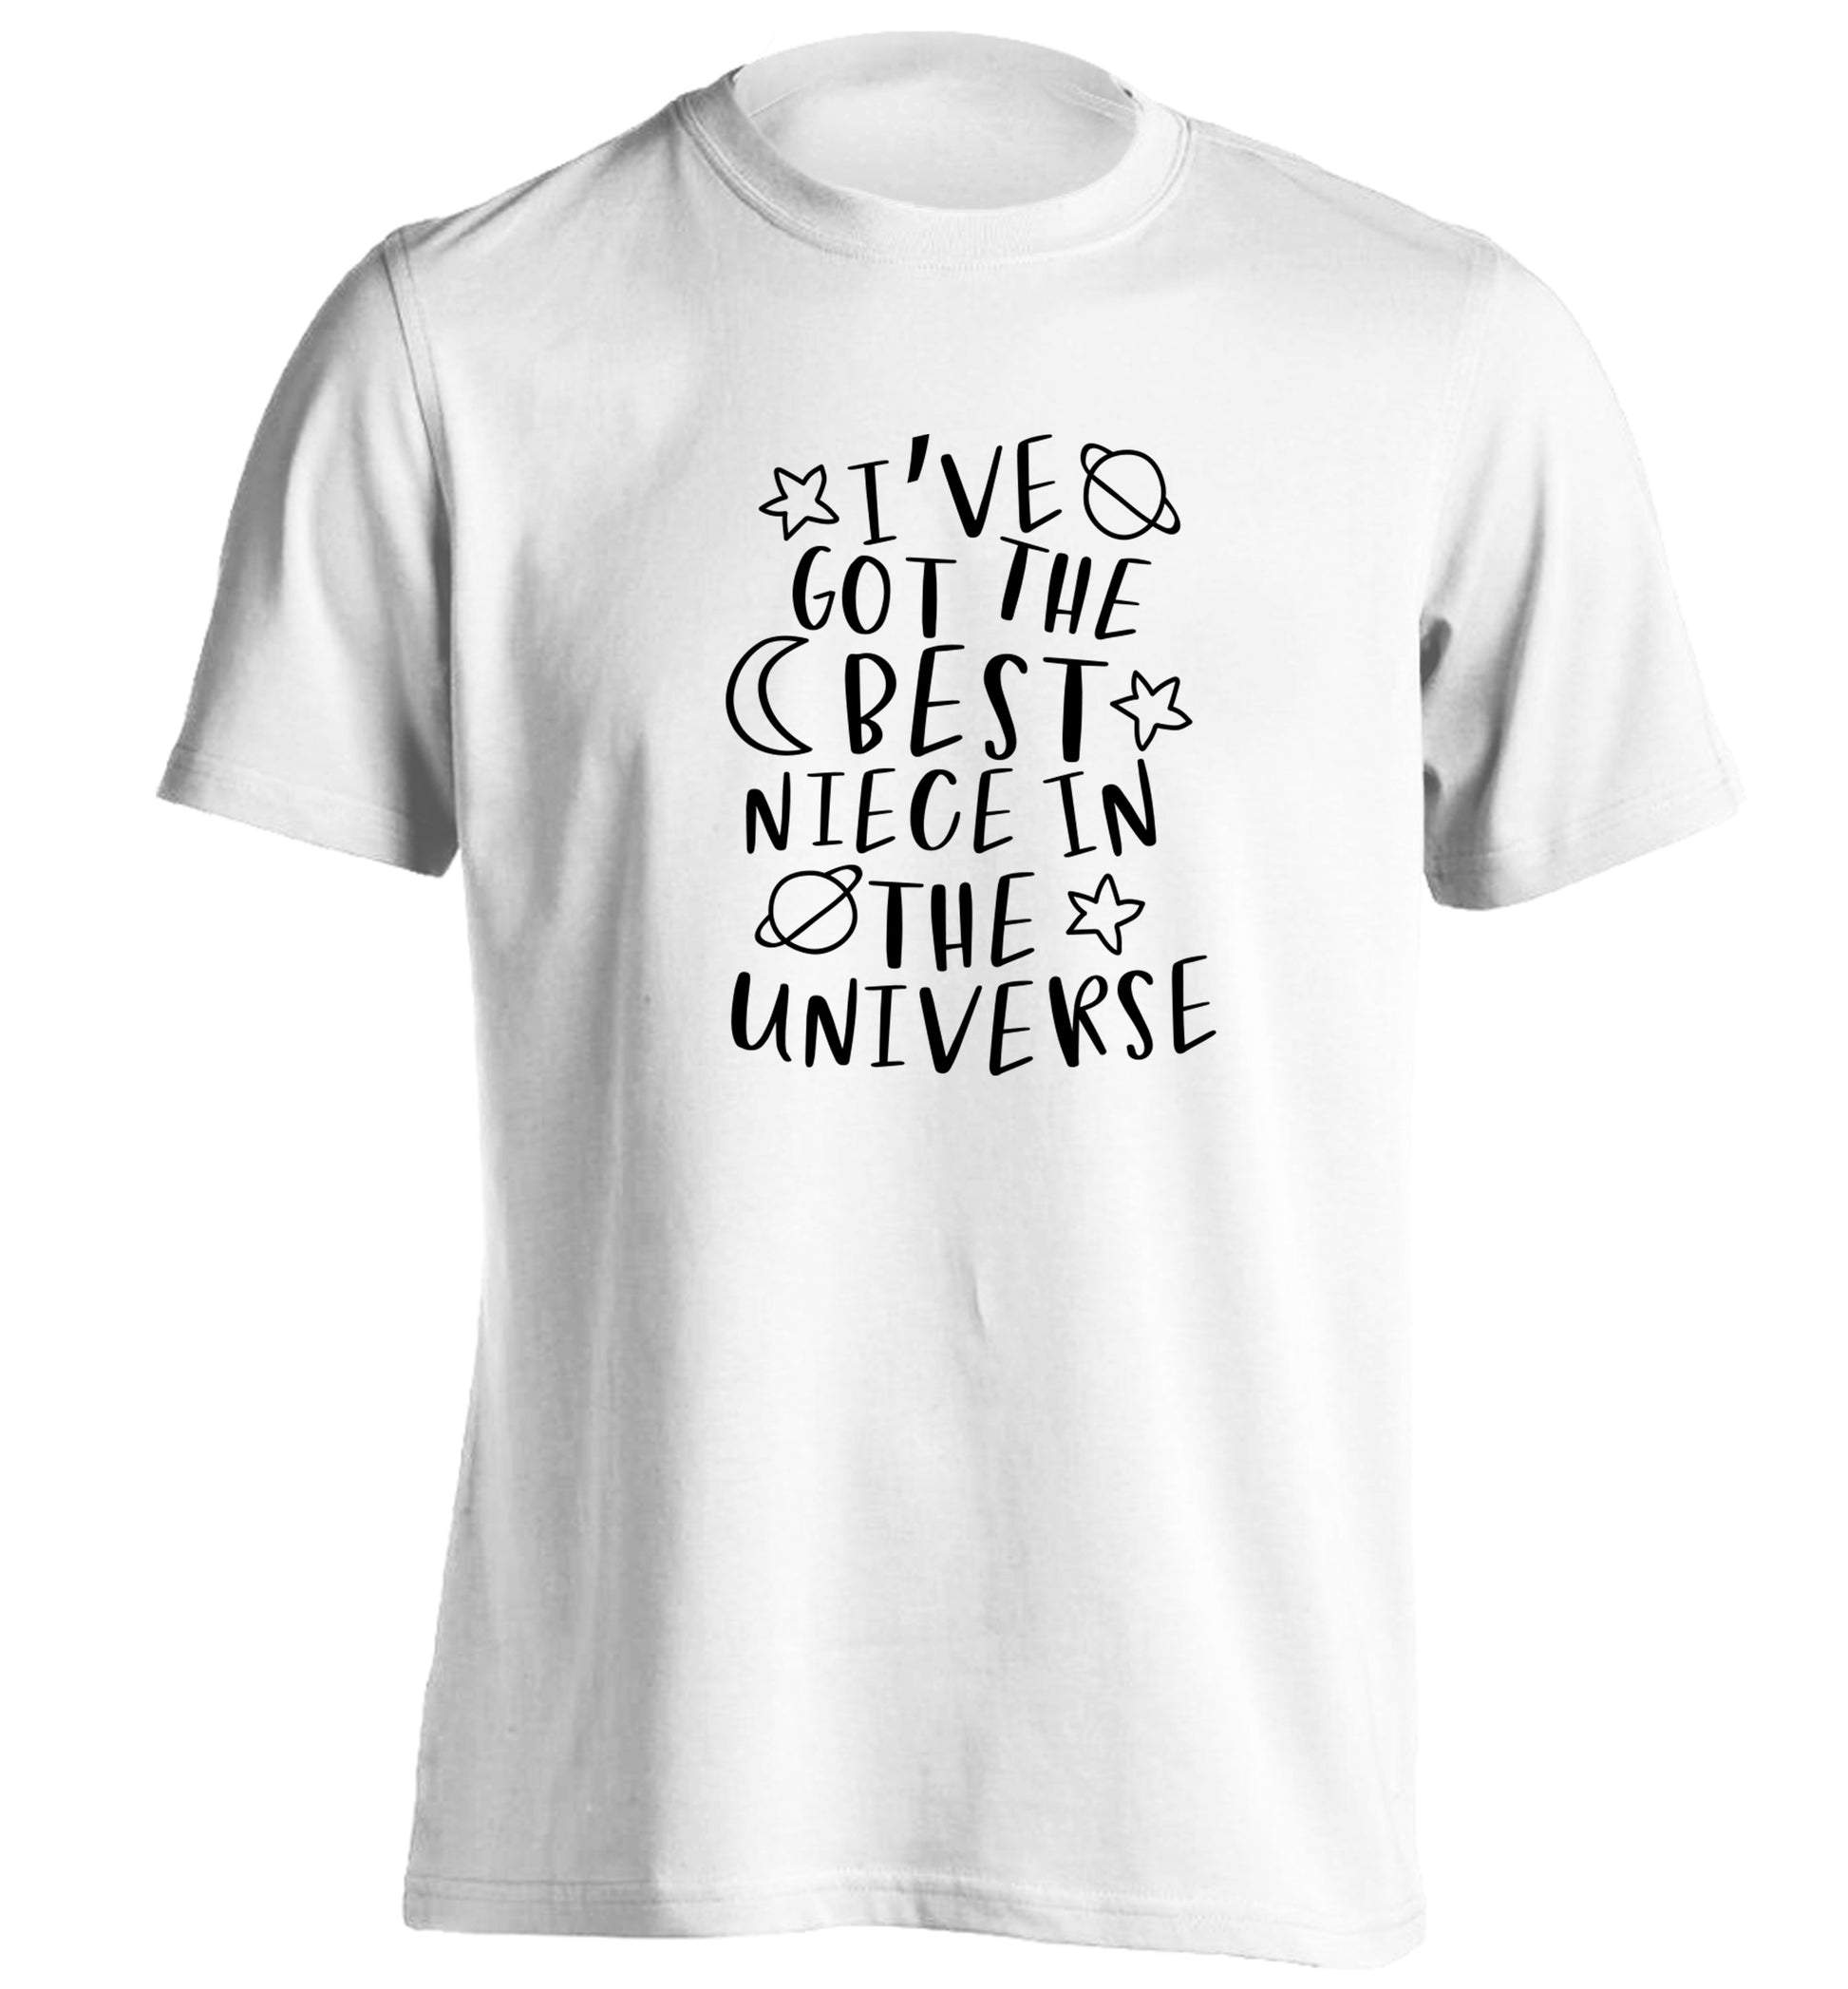 I've got the best niece in the universe adults unisex white Tshirt 2XL